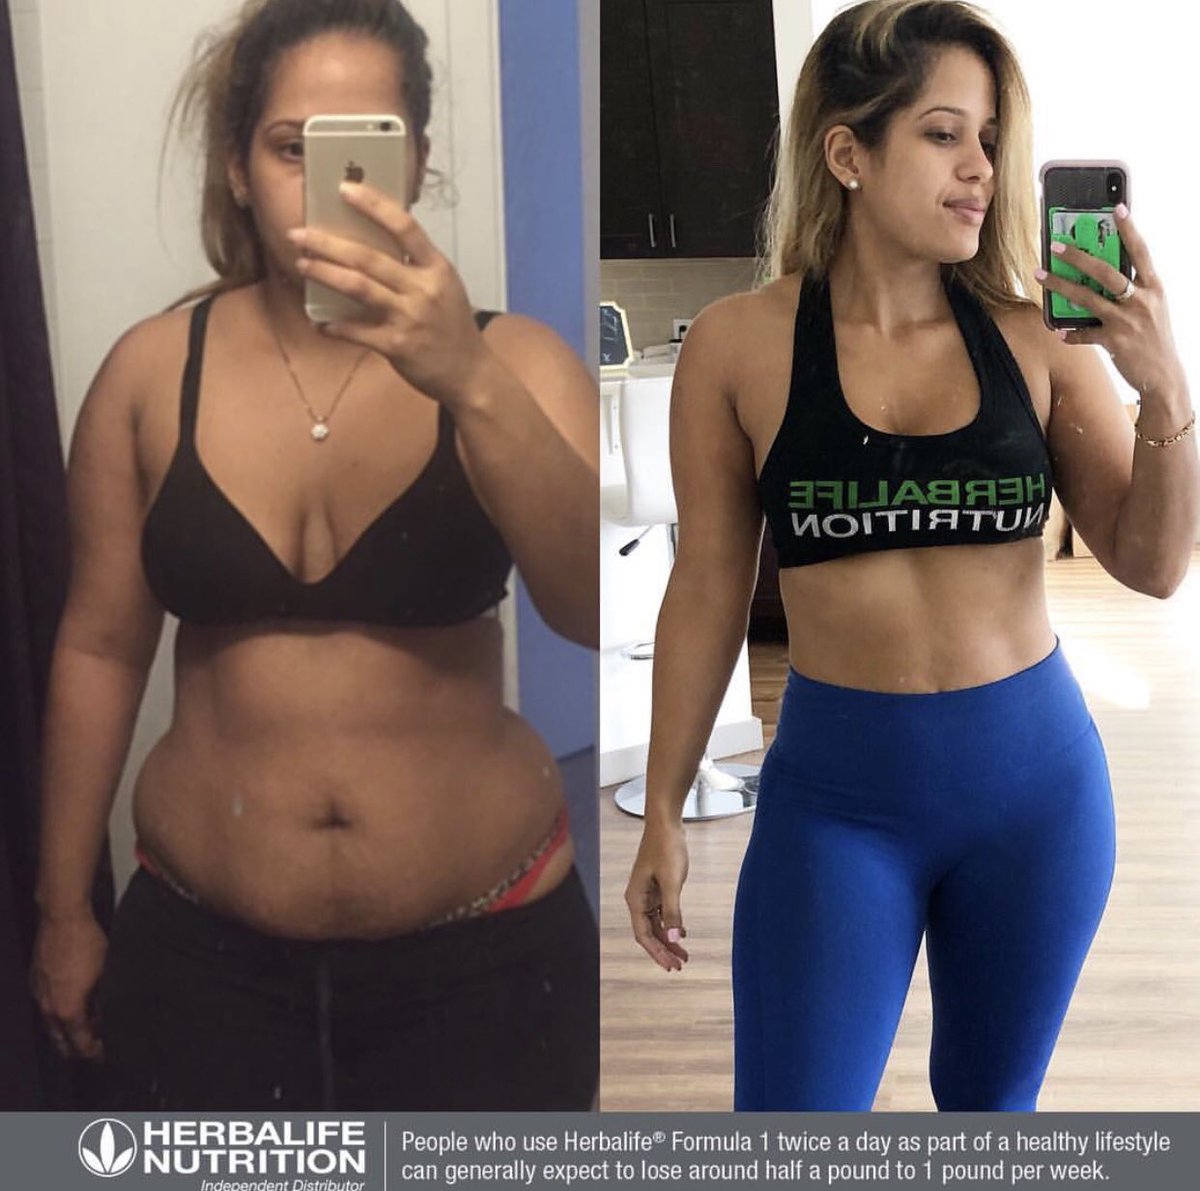 Angie results are amazing #herbaliferesults #motivation 🔥
 #progresspic  #lifting  #gym  #excercise  #weightloss  #workout  #change  #fatlosstransformation  #gymlife  #transformationchallenge  #weightlossjourney  #transformations  #trainandtransform  #fitspiration